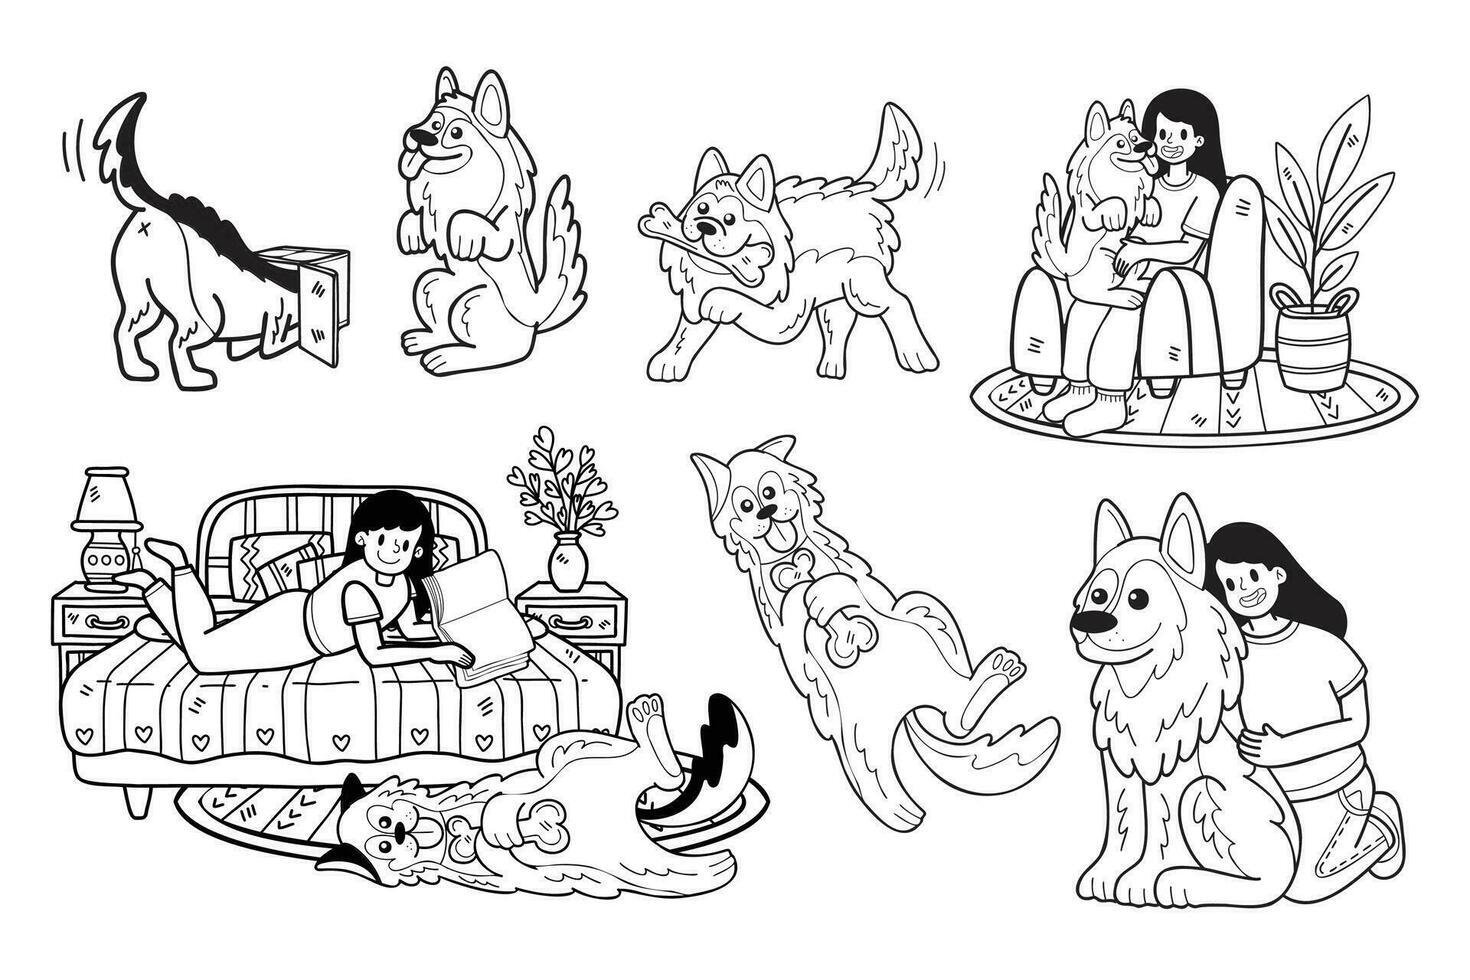 Hand Drawn German Shepherd Dog and family collection in flat style illustration for business ideas vector